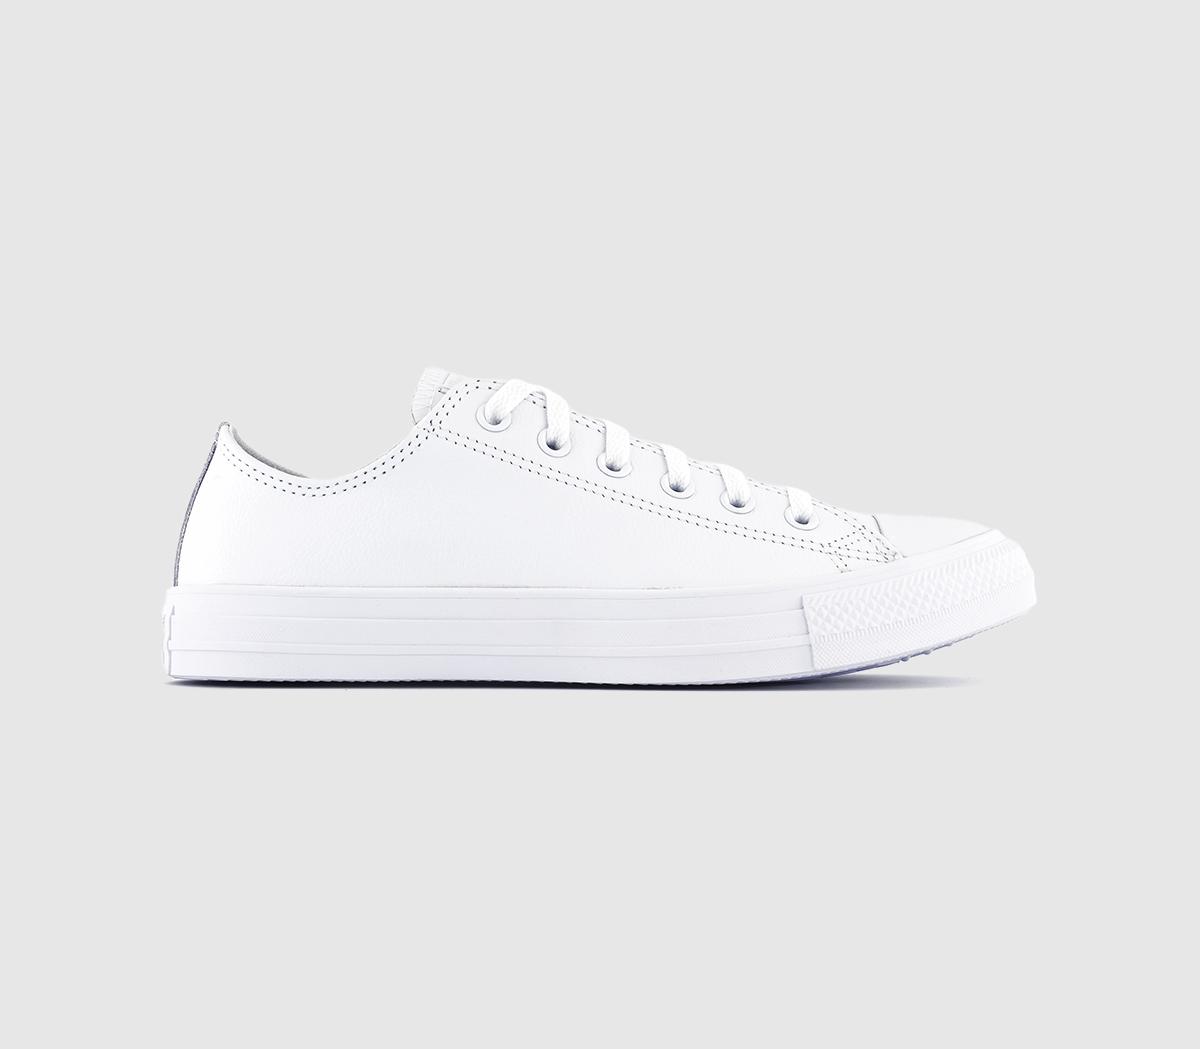 Subproducto Adelantar sueño Converse All Star Low Leather Trainers White Mono Leather - Unisex Sports